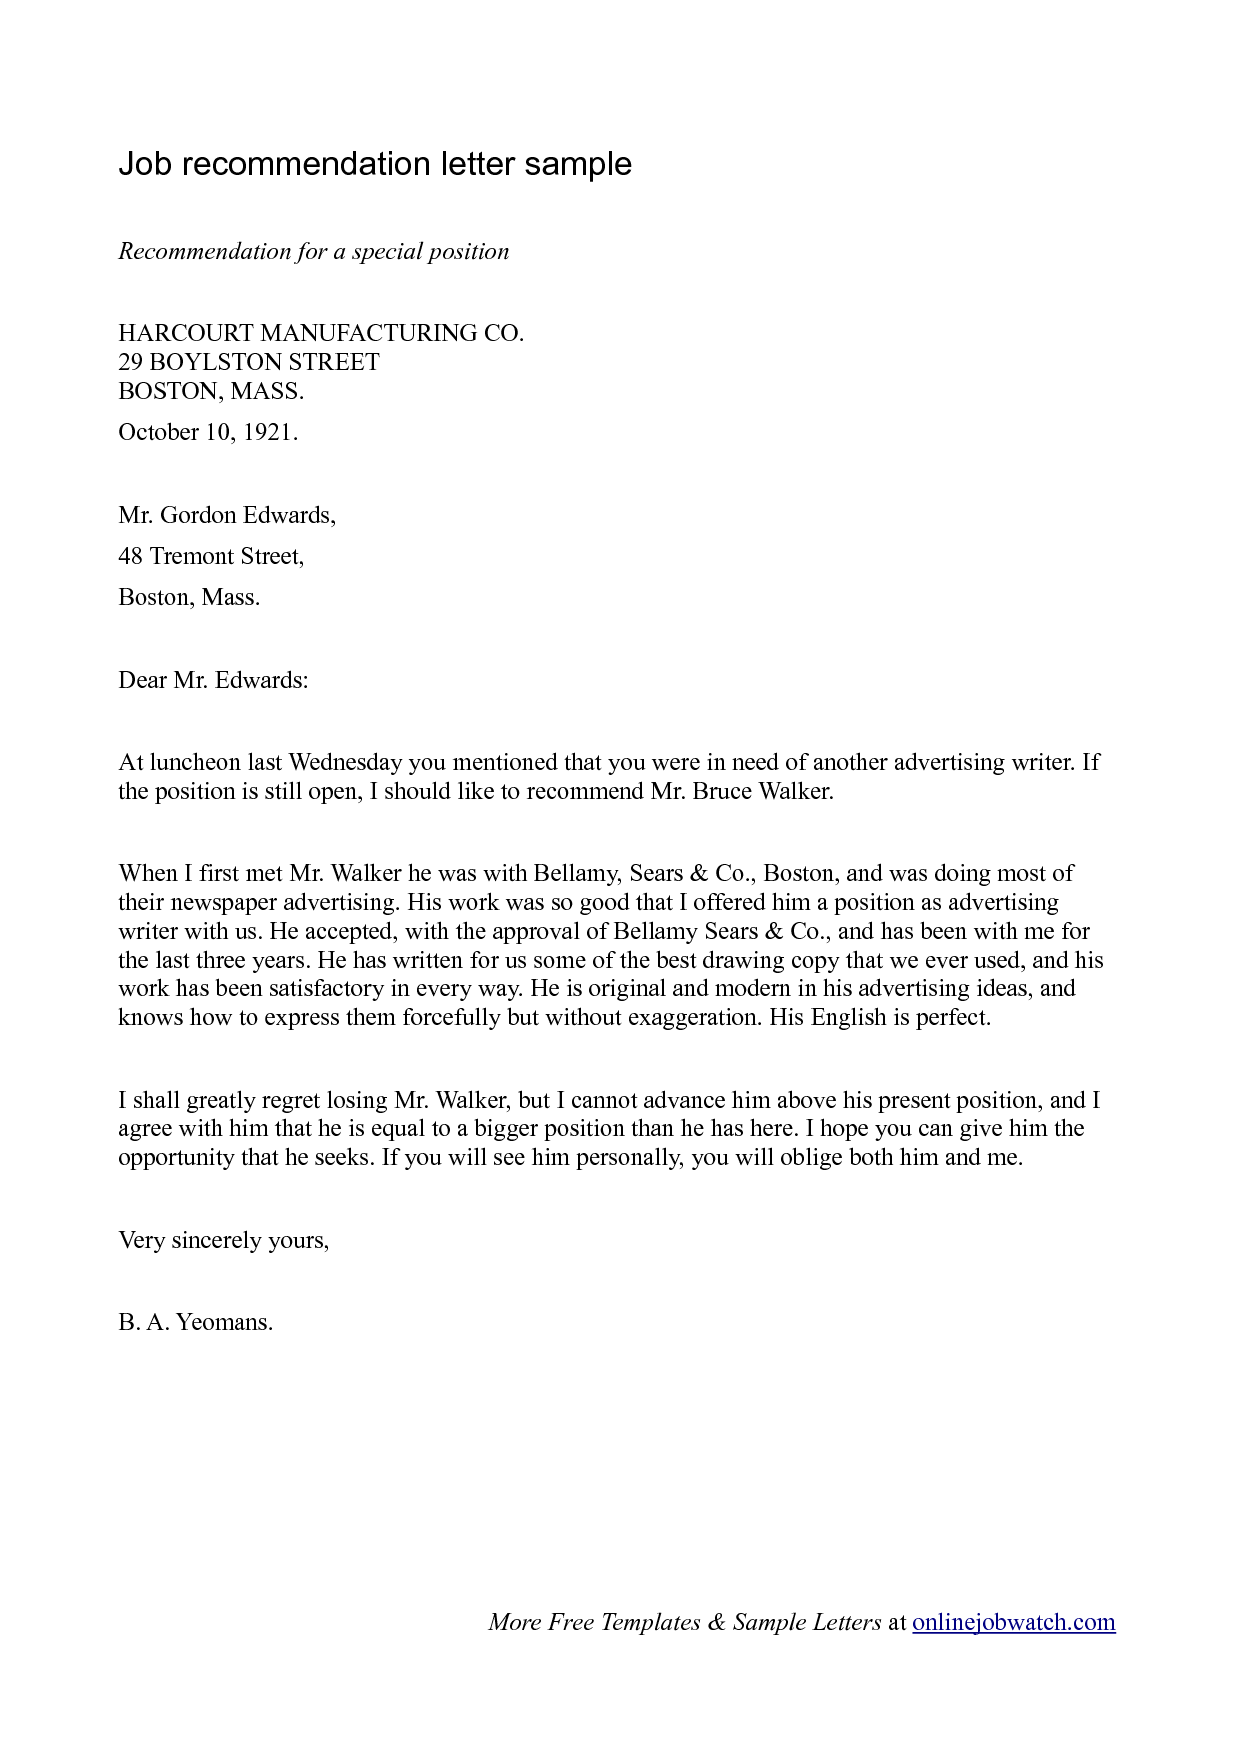 Letter Of Recommendation Job Template from cdn.lifehack.org